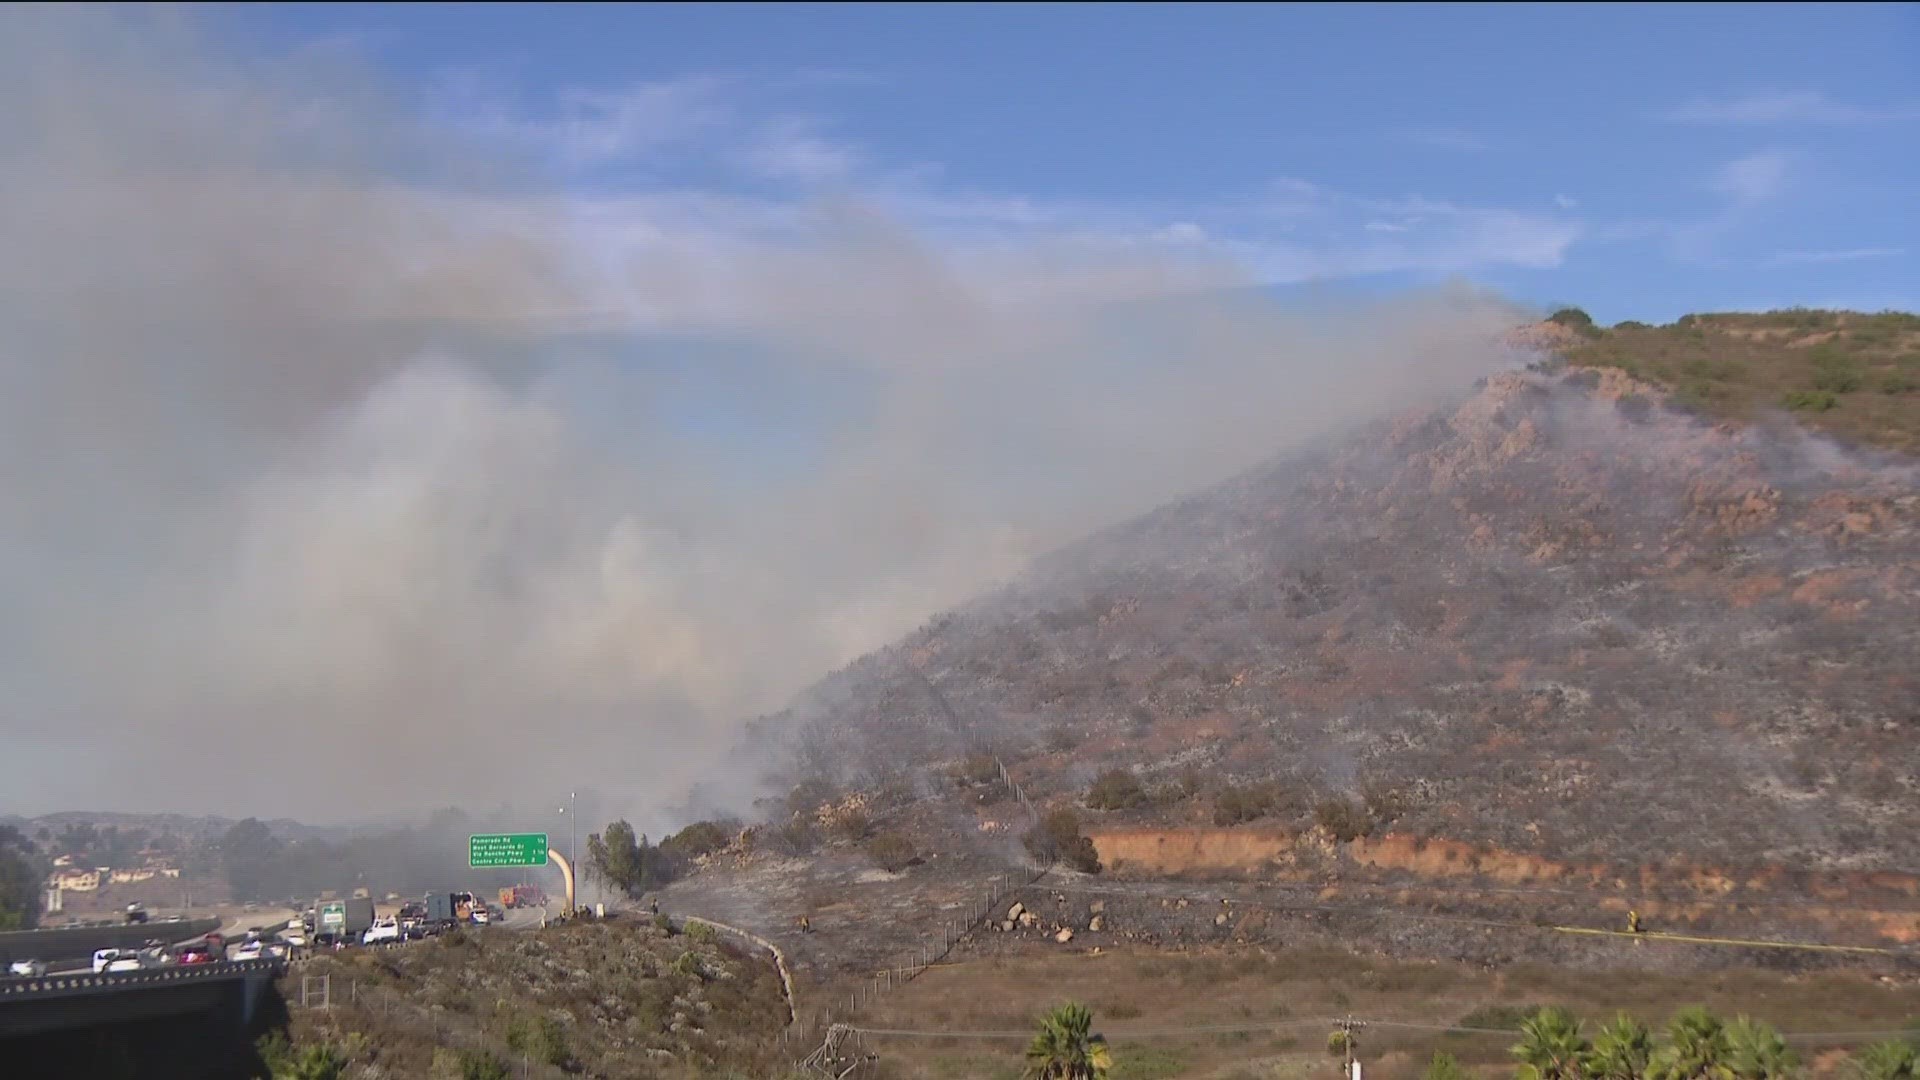 Fire crews worked quickly to extinguish the 5-acre Escala Fire burning on Battle Mountain in Rancho Bernardo alongside northbound Interstate 15 Monday afternoon.